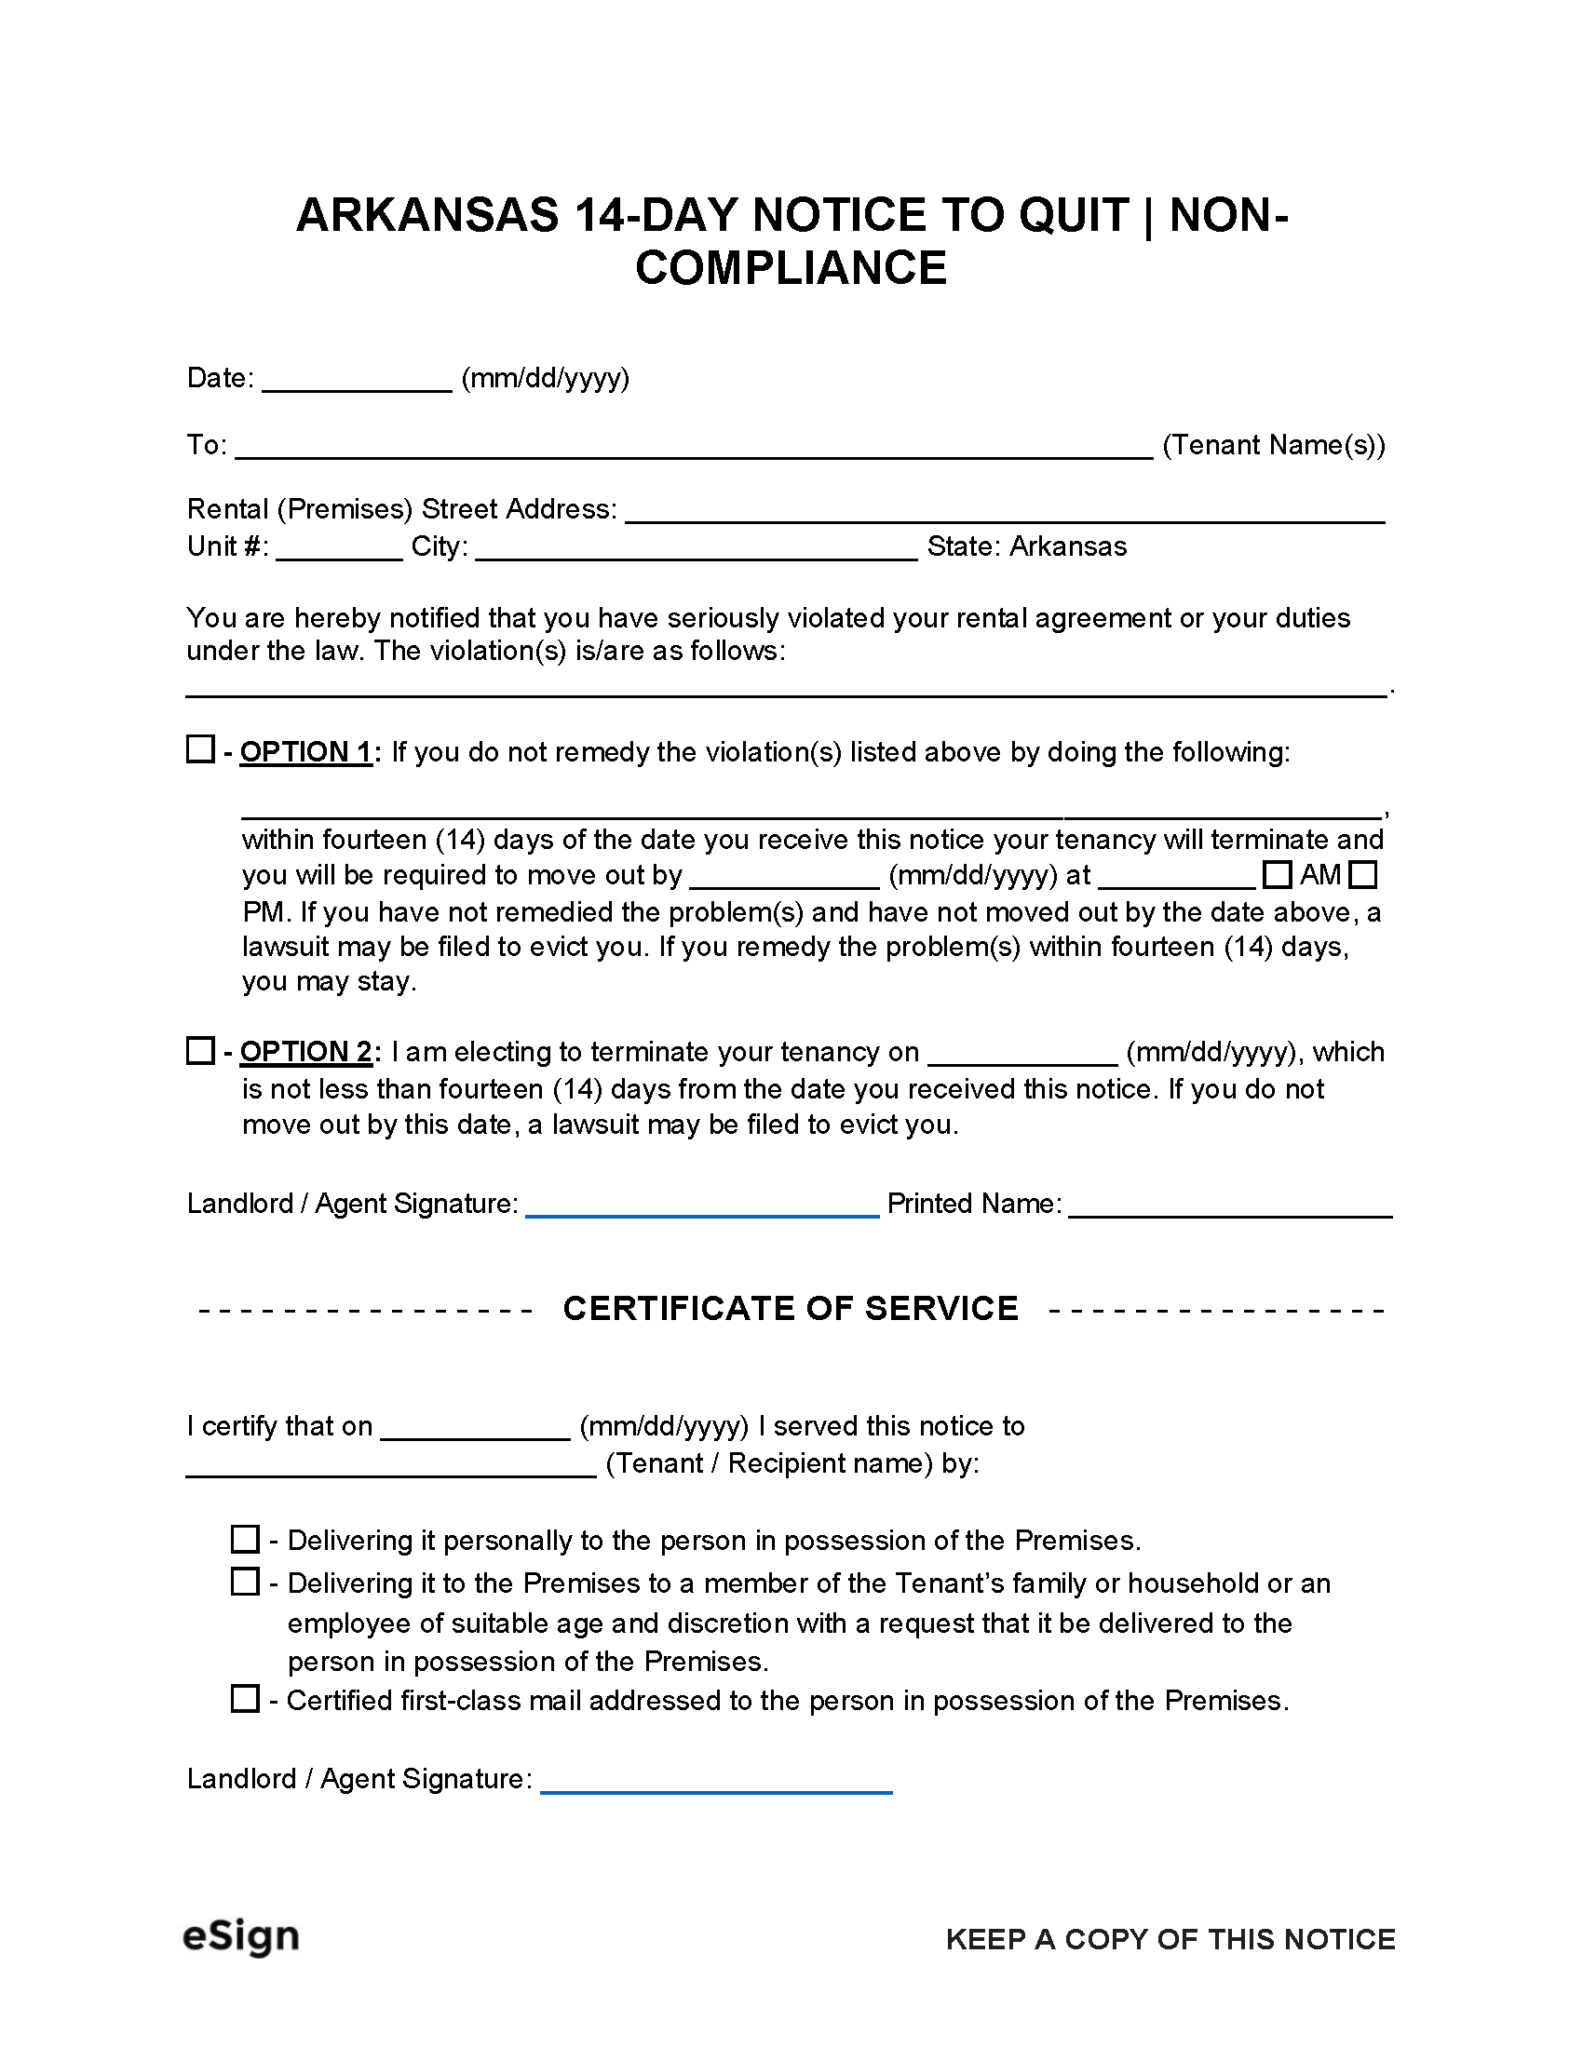 Free Arkansas 14 Day Notice to Quit Non Compliance PDF Word